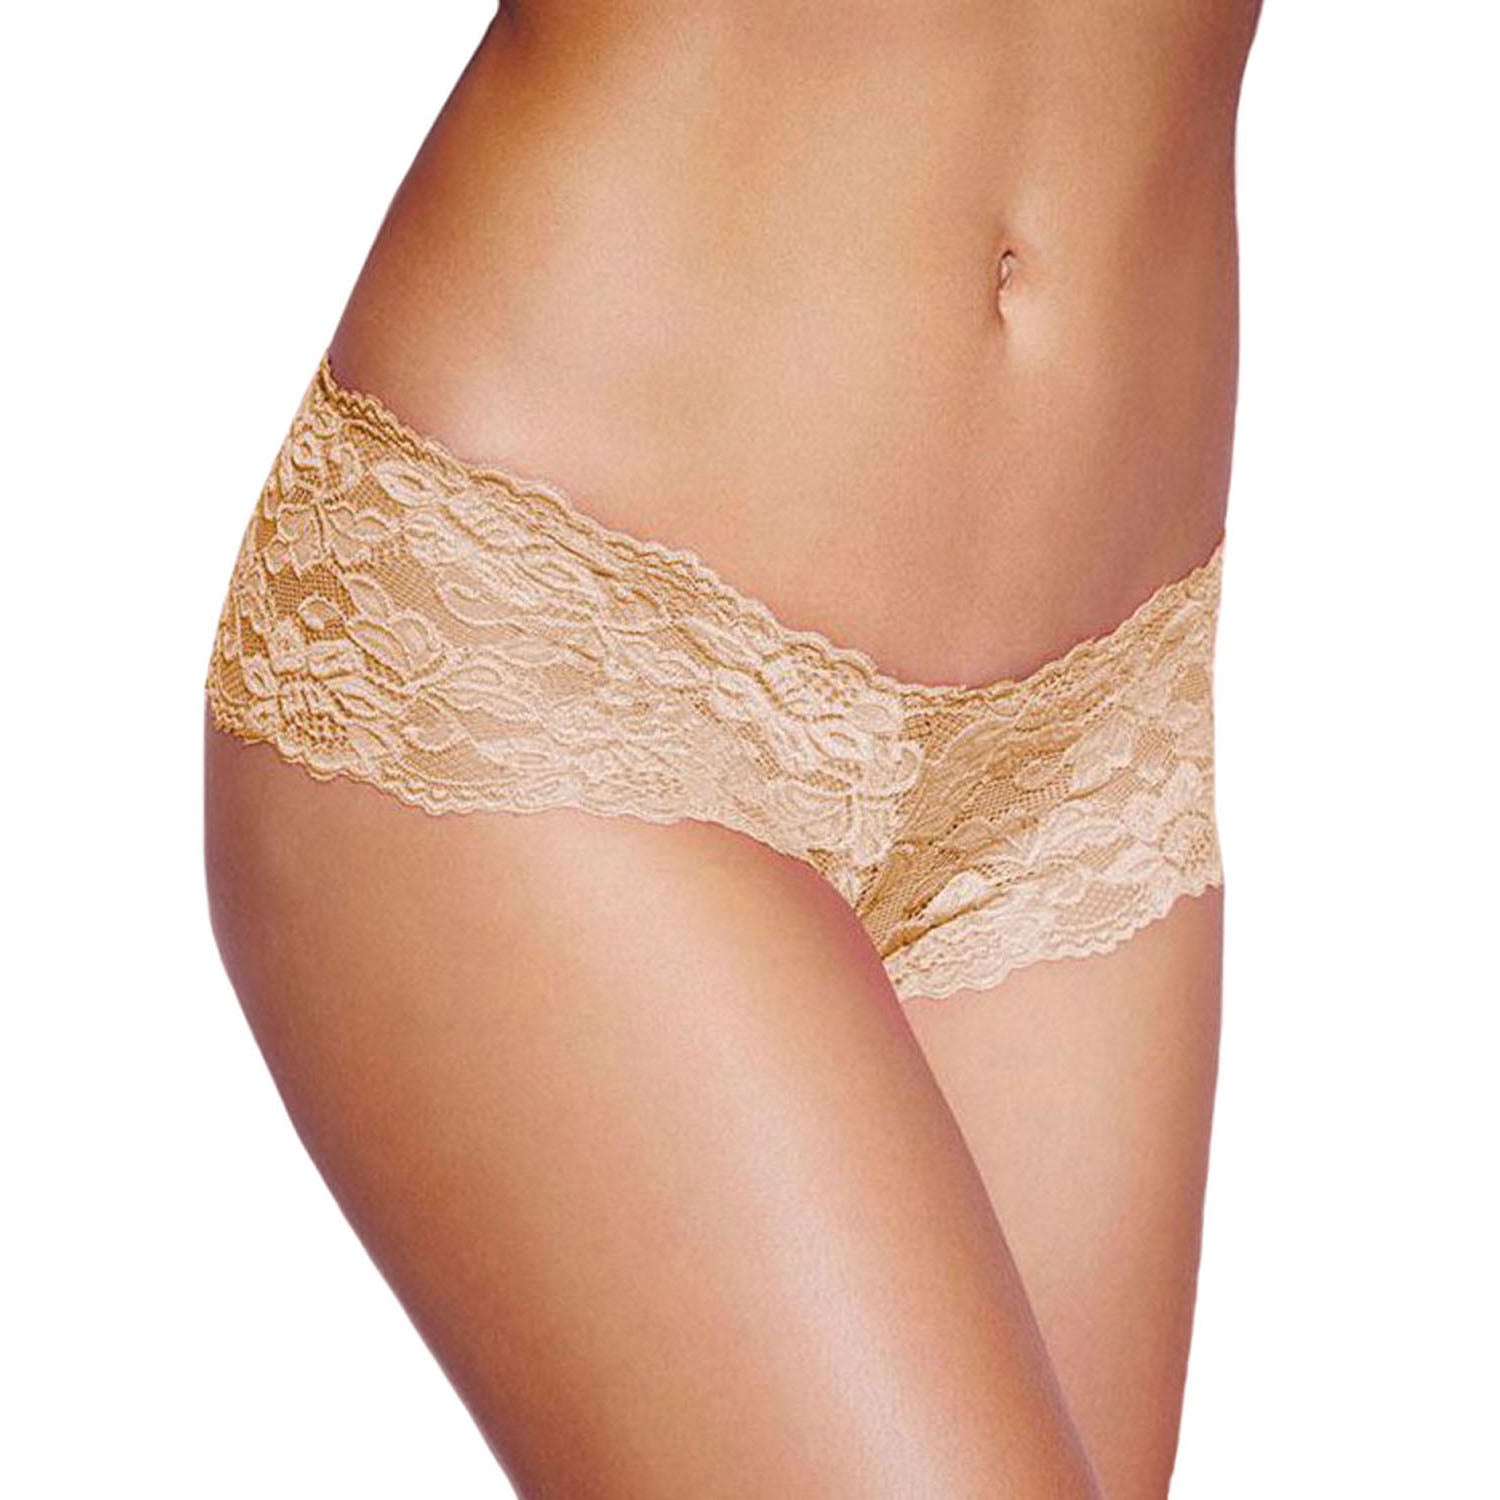 Floral Lace Scalloped French Knickers - Golden Beige